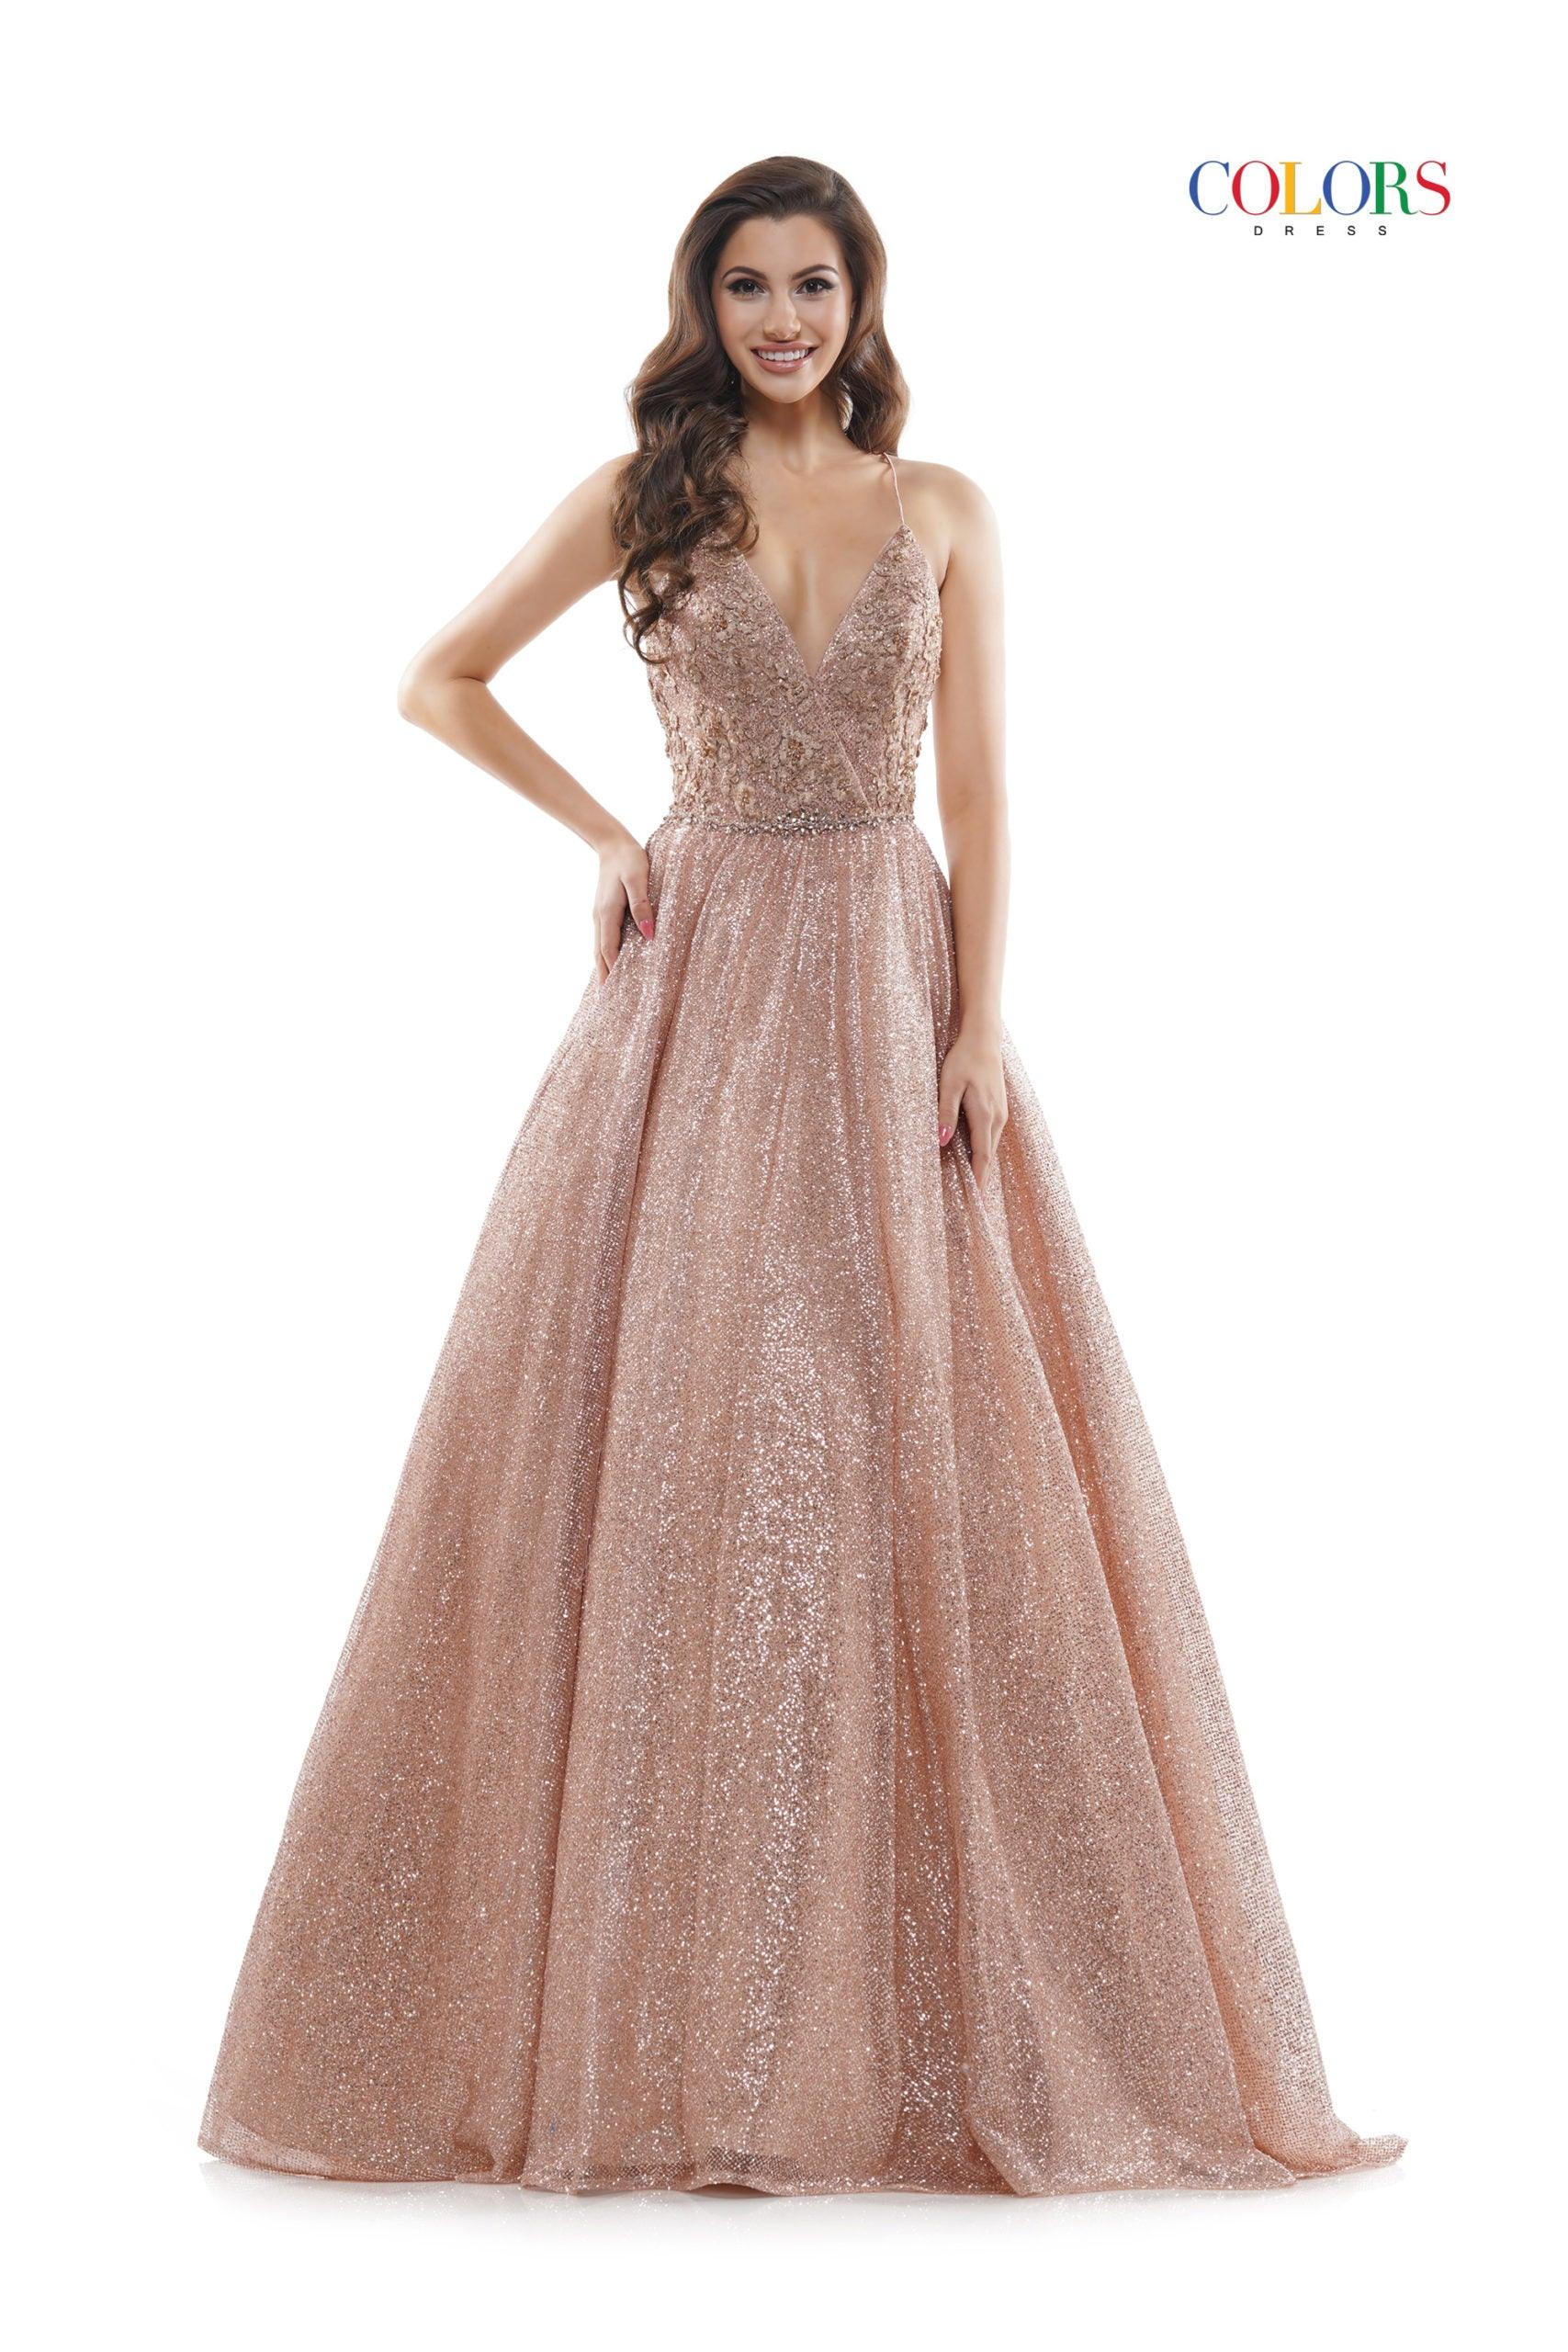 Colors Long Formal Glitter Mesh Prom Dress 2480 - The Dress Outlet